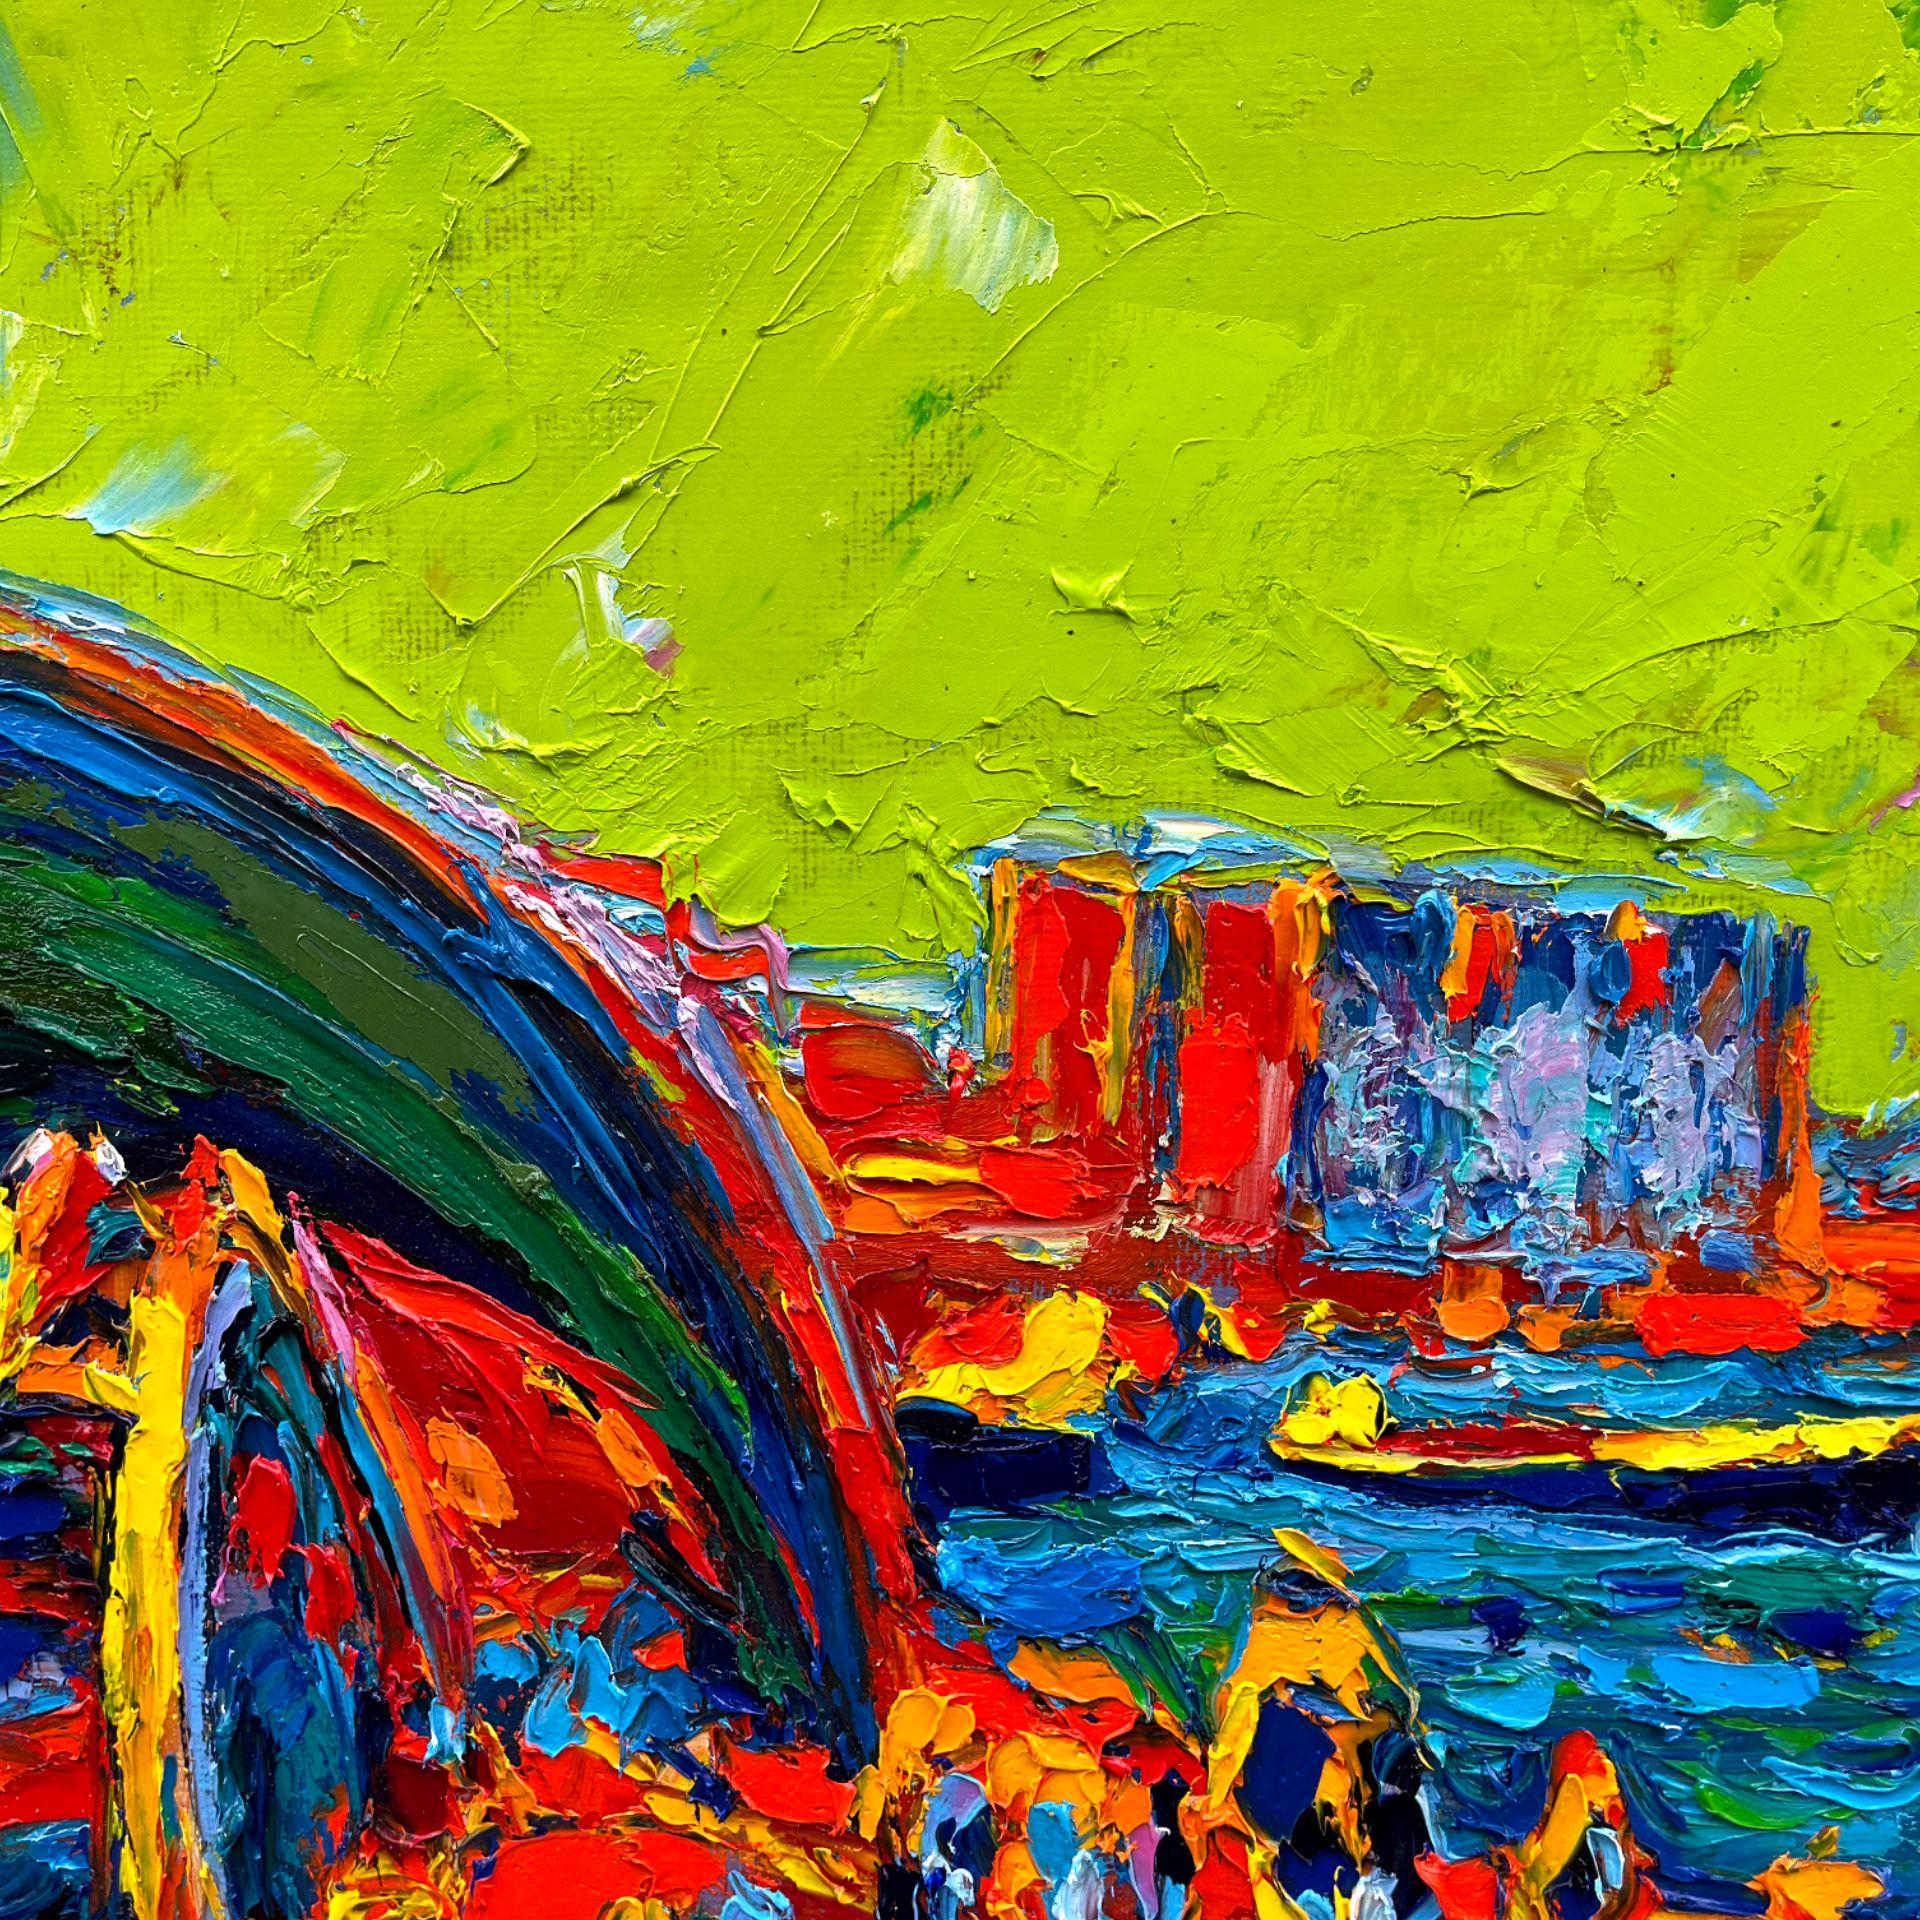 Bright Amsterdam, Painting, Oil on Canvas 1